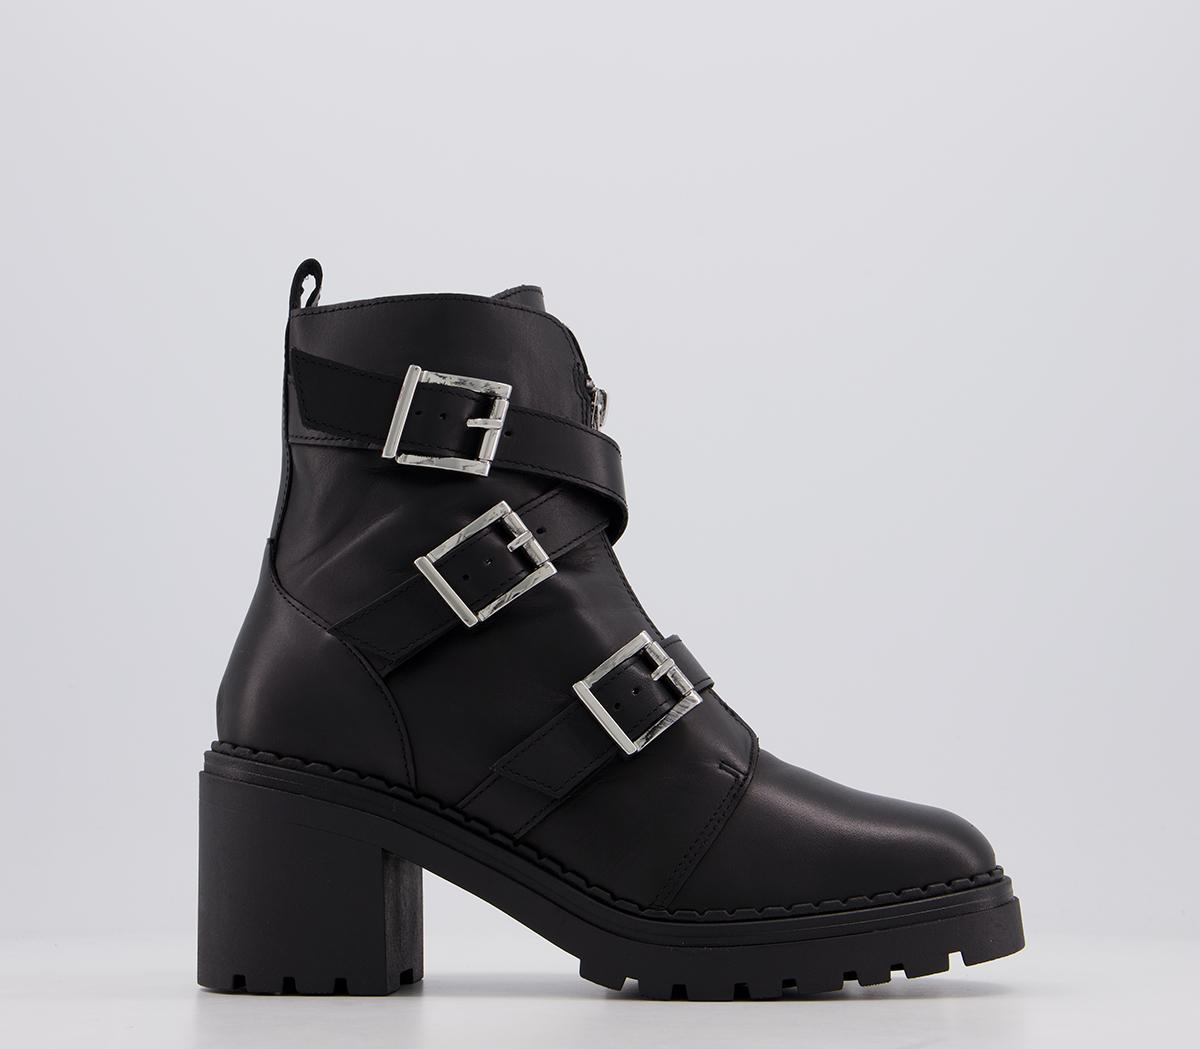 OFFICEAbsolute Buckle Casual Ankle BootsBlack Leather